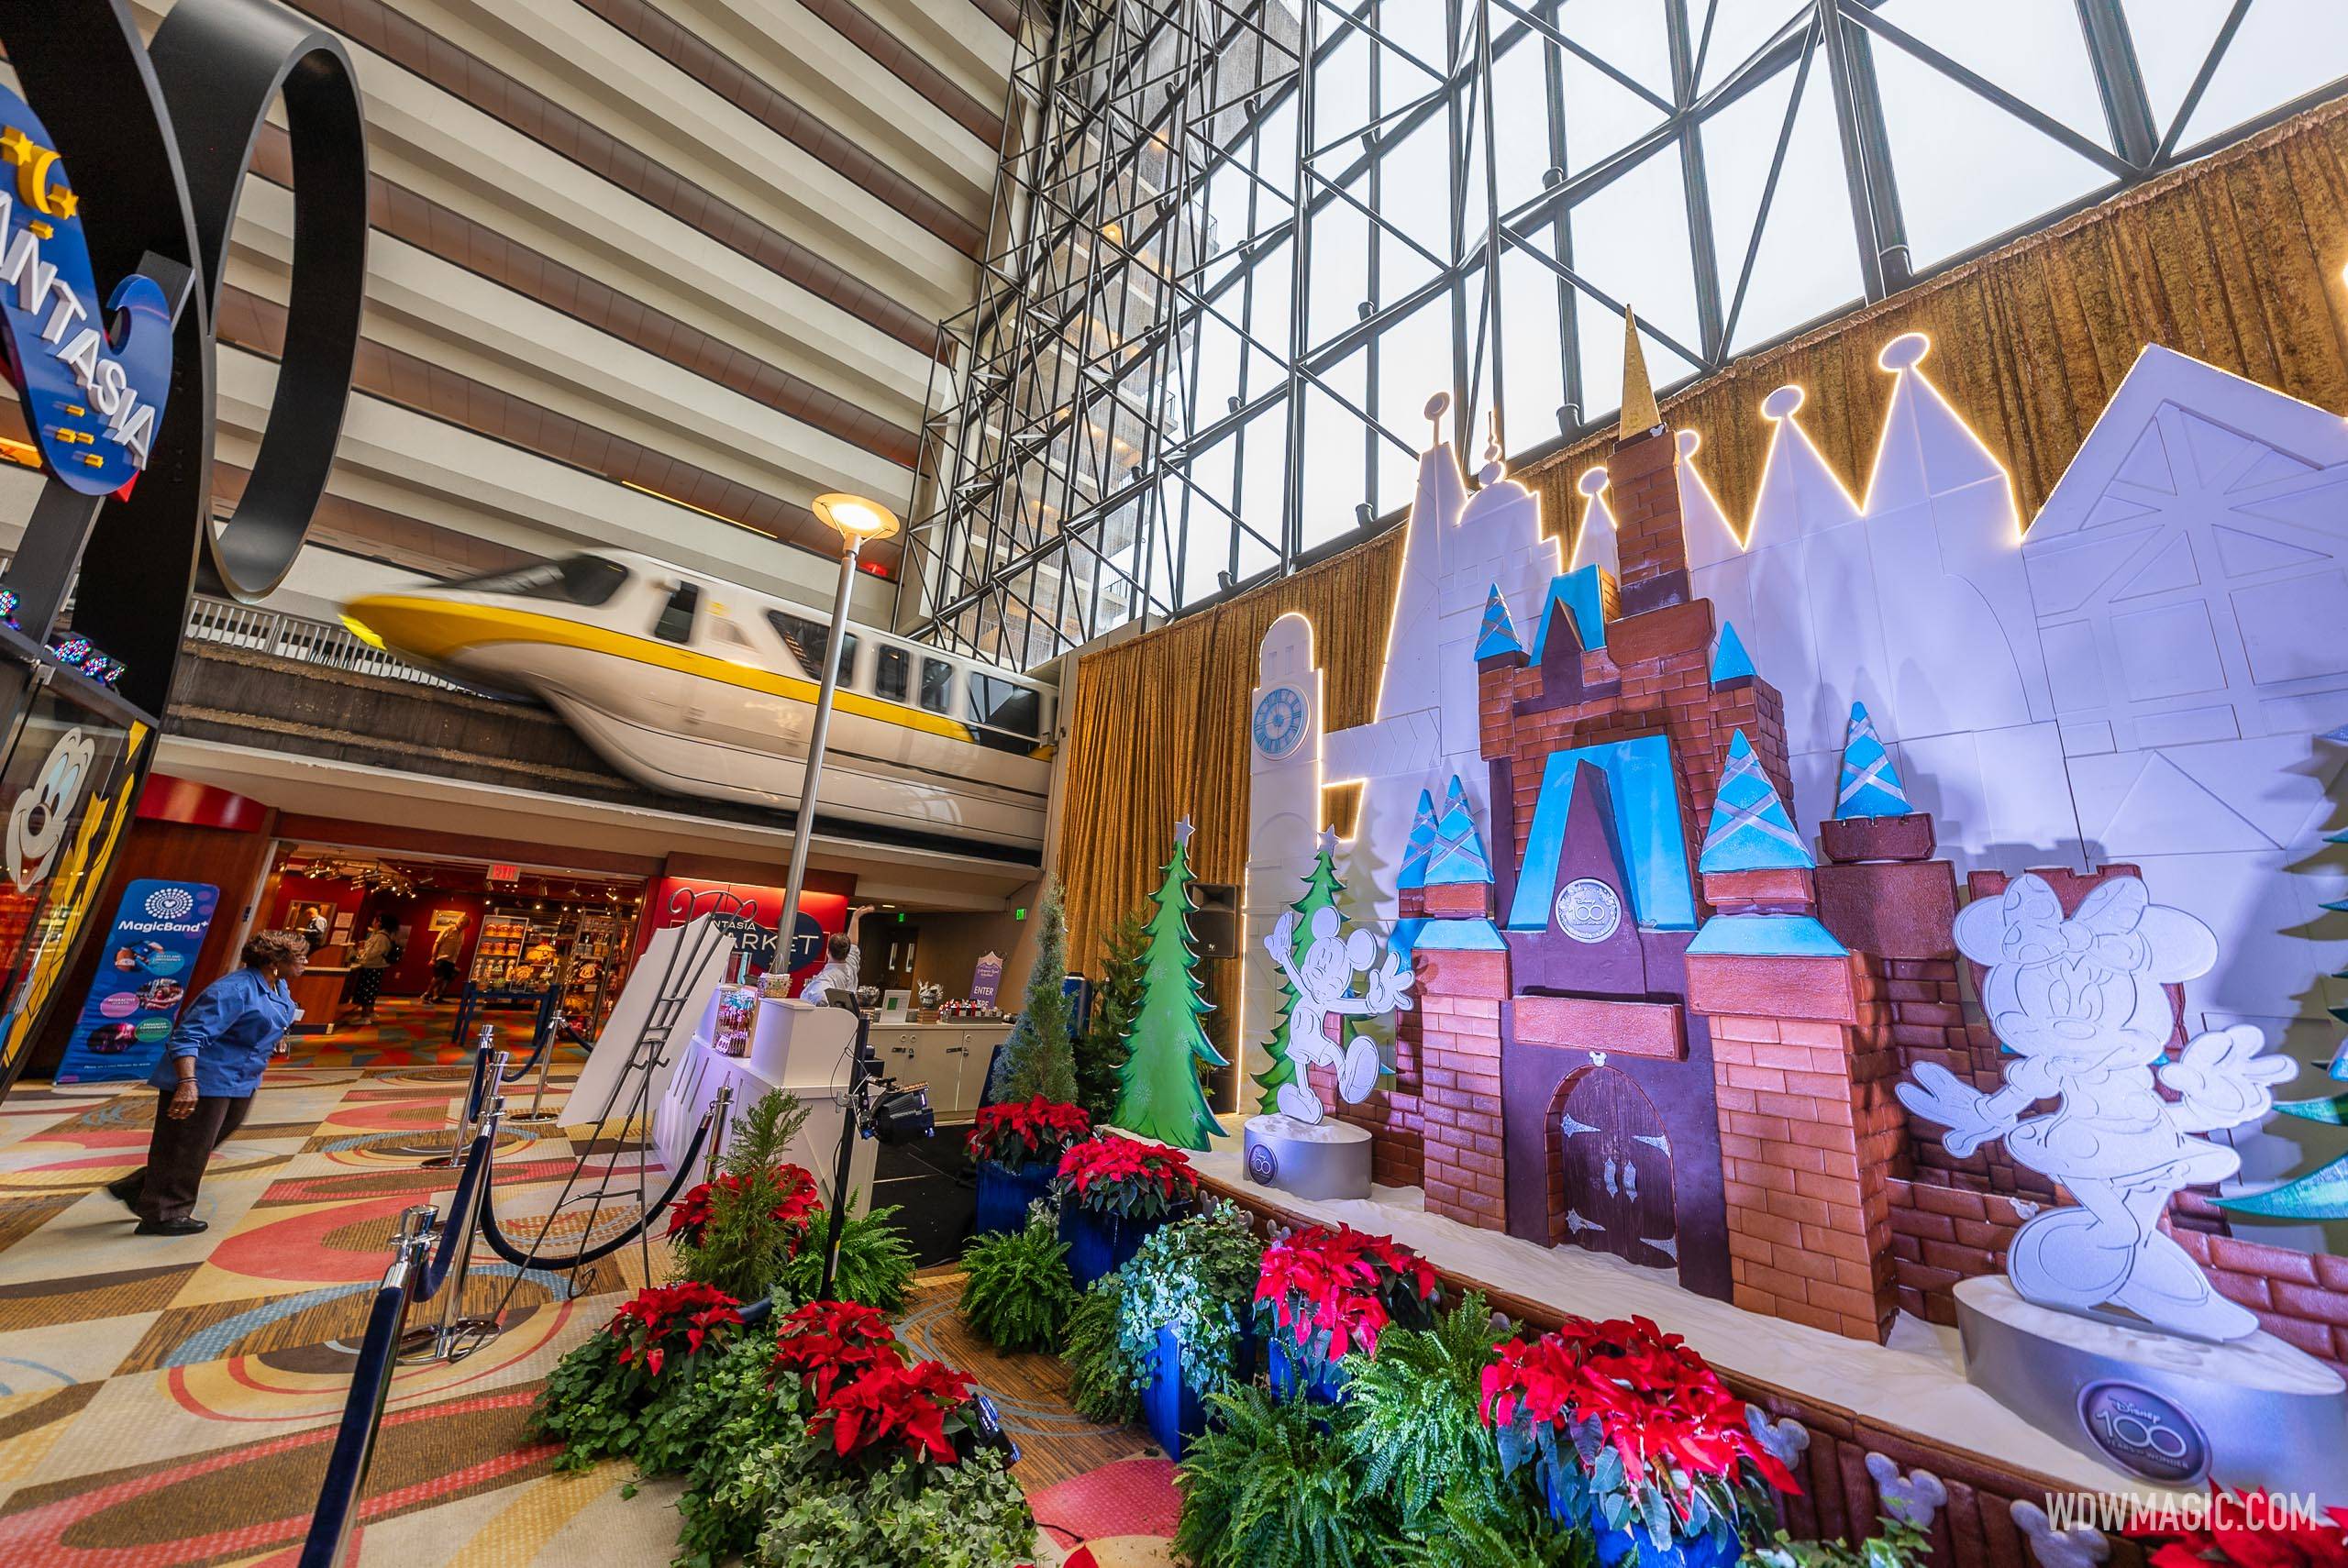 Disney Imagineers designed a 25-Foot wide Mary Blair-inspired 100th Celebration-themed Gingerbread Castle